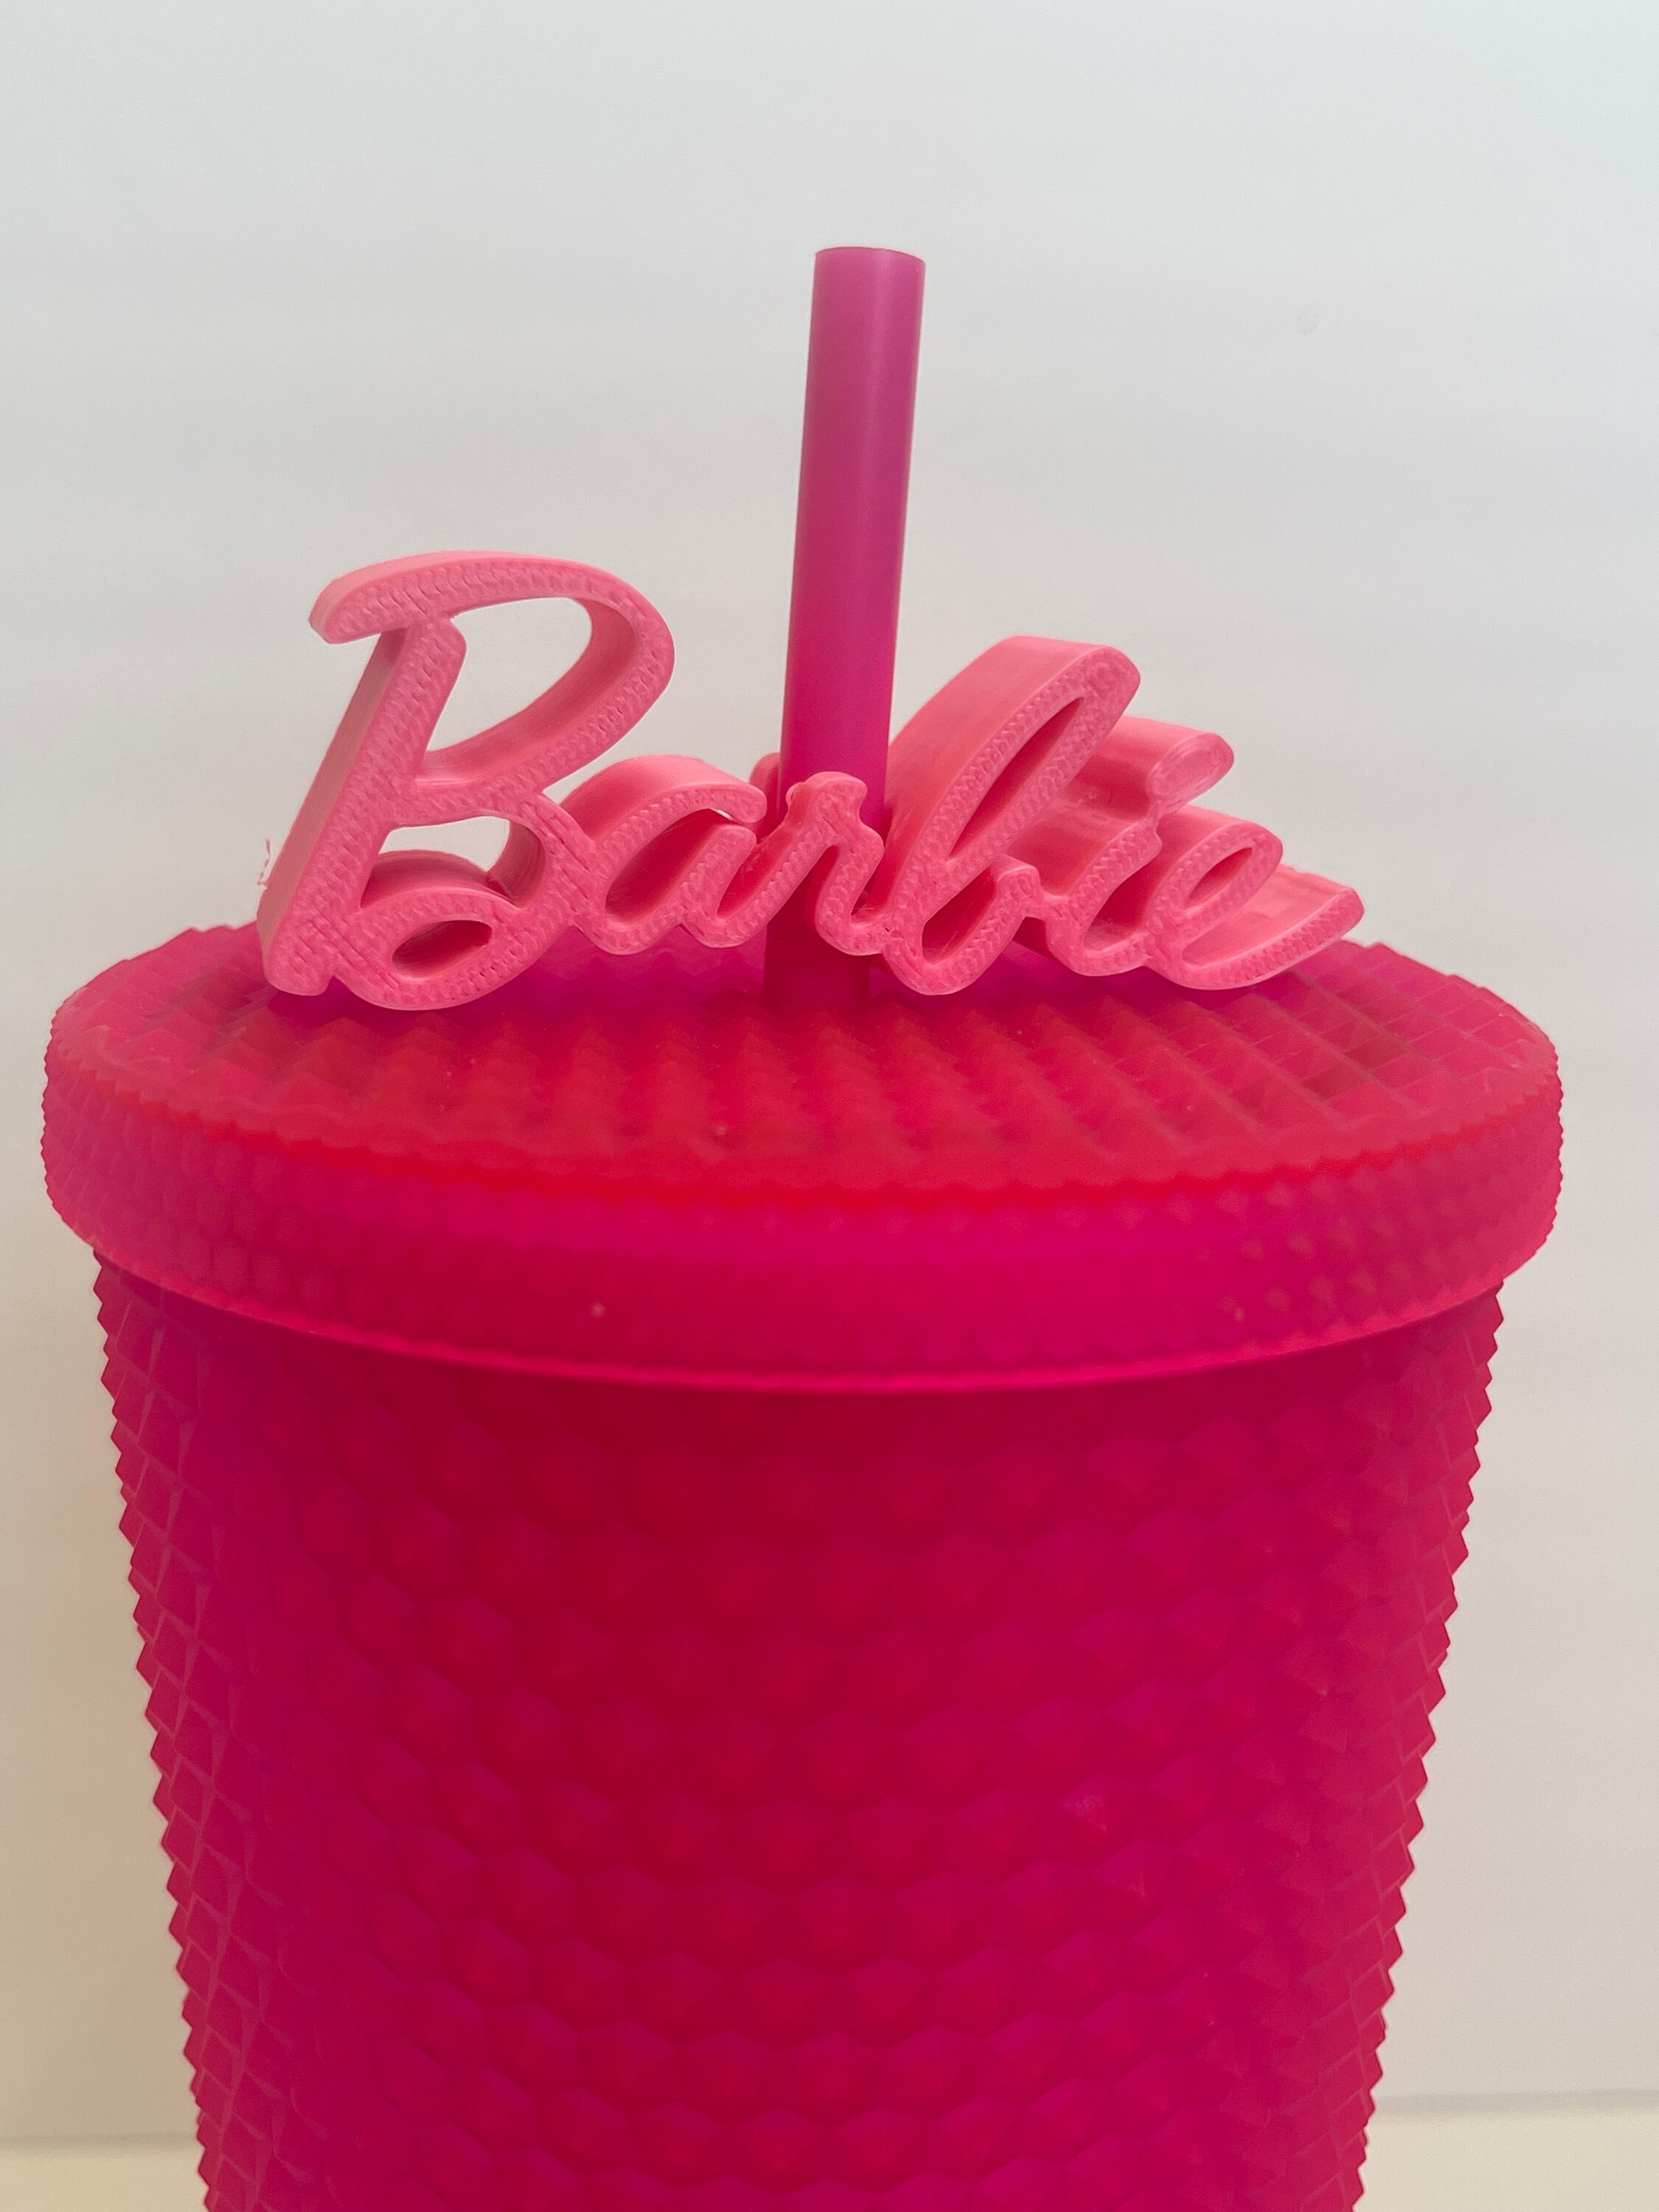 Barbie Straw Topper Mold 